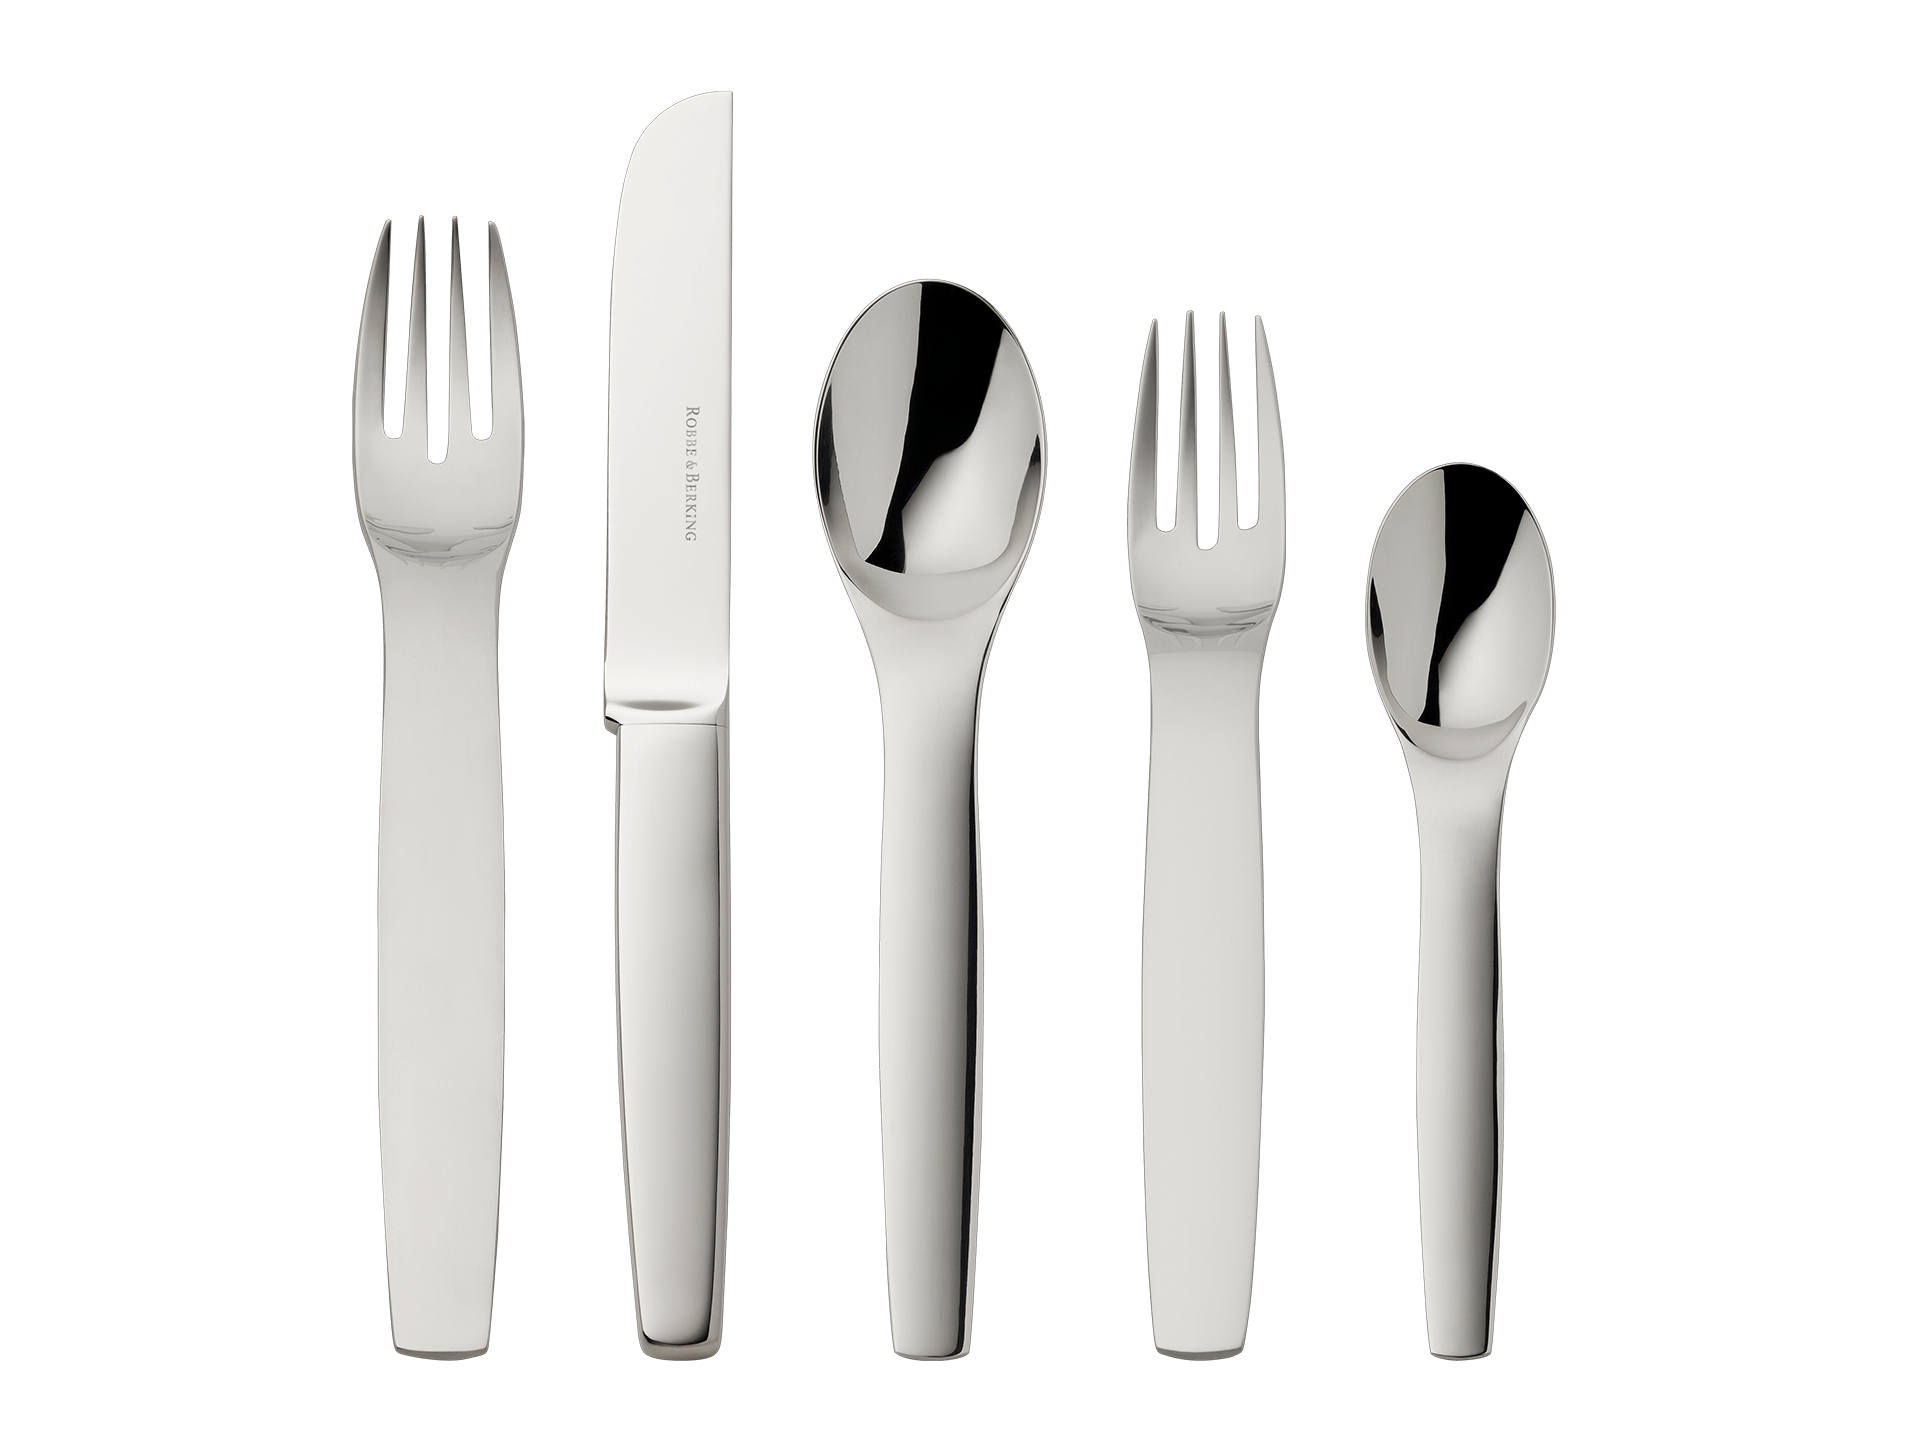 Pax 5-piece place setting (18/8 stainless steel)